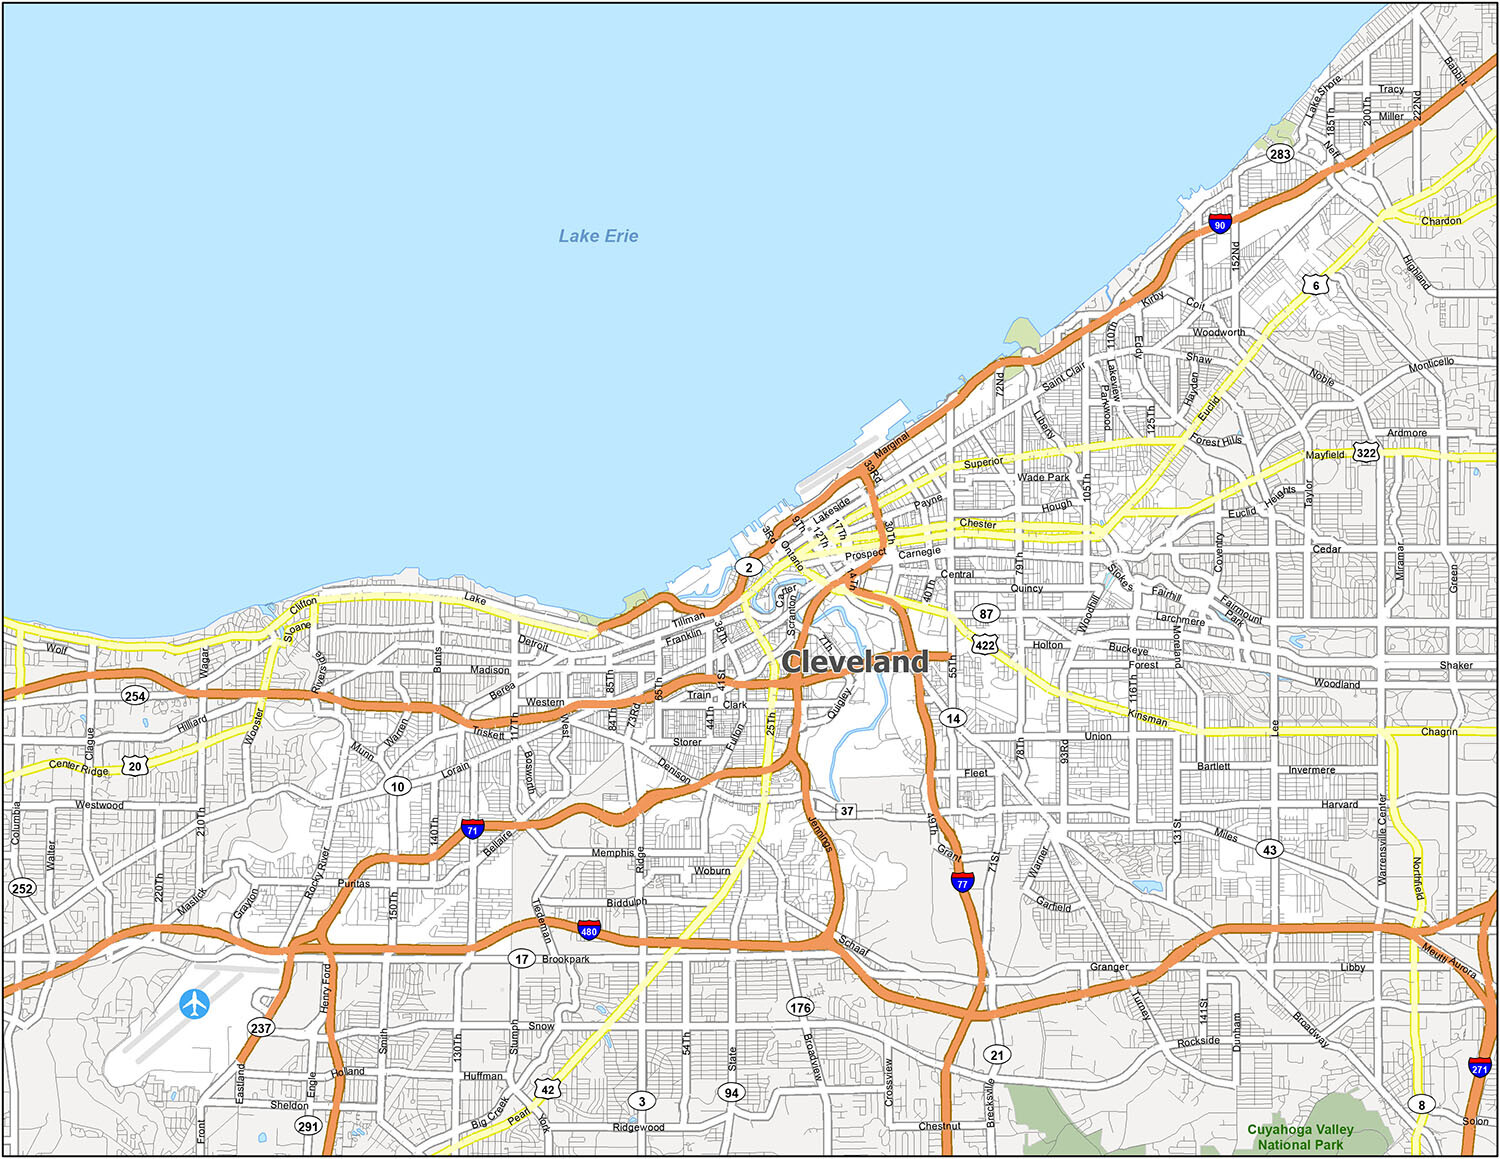 https://gisgeography.com/wp-content/uploads/2020/06/Cleveland-Road-Map.jpg